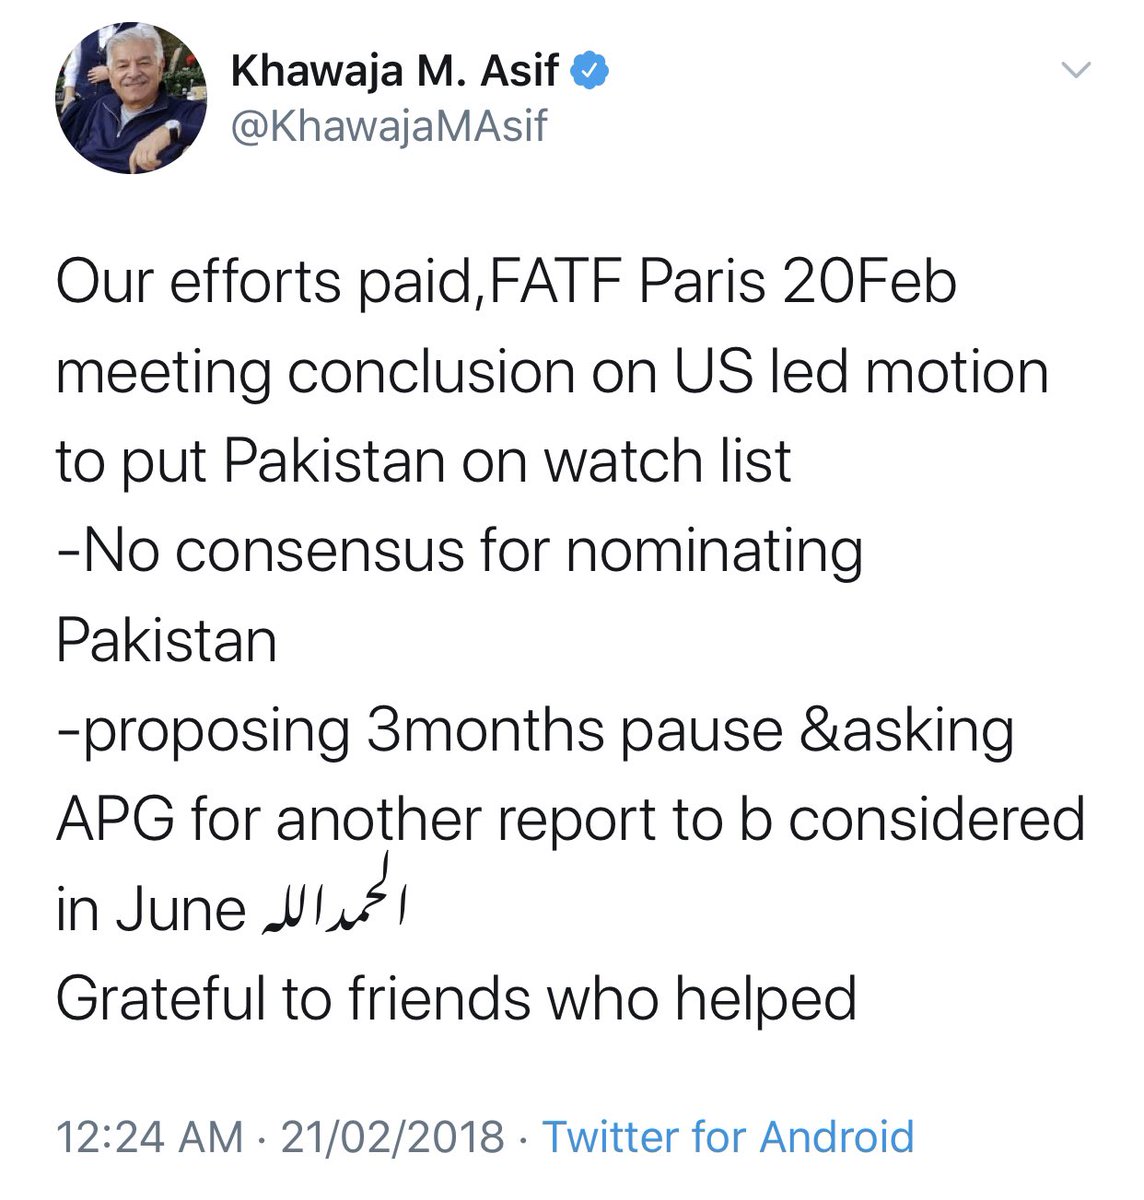  @KhawajaMAsif The Then MoFA in Pmln led Government gives false impression of averting FATF Grey List Feb 2018, a few months before Country was placed on Grey List. Which turned out to be a hoax few months later.